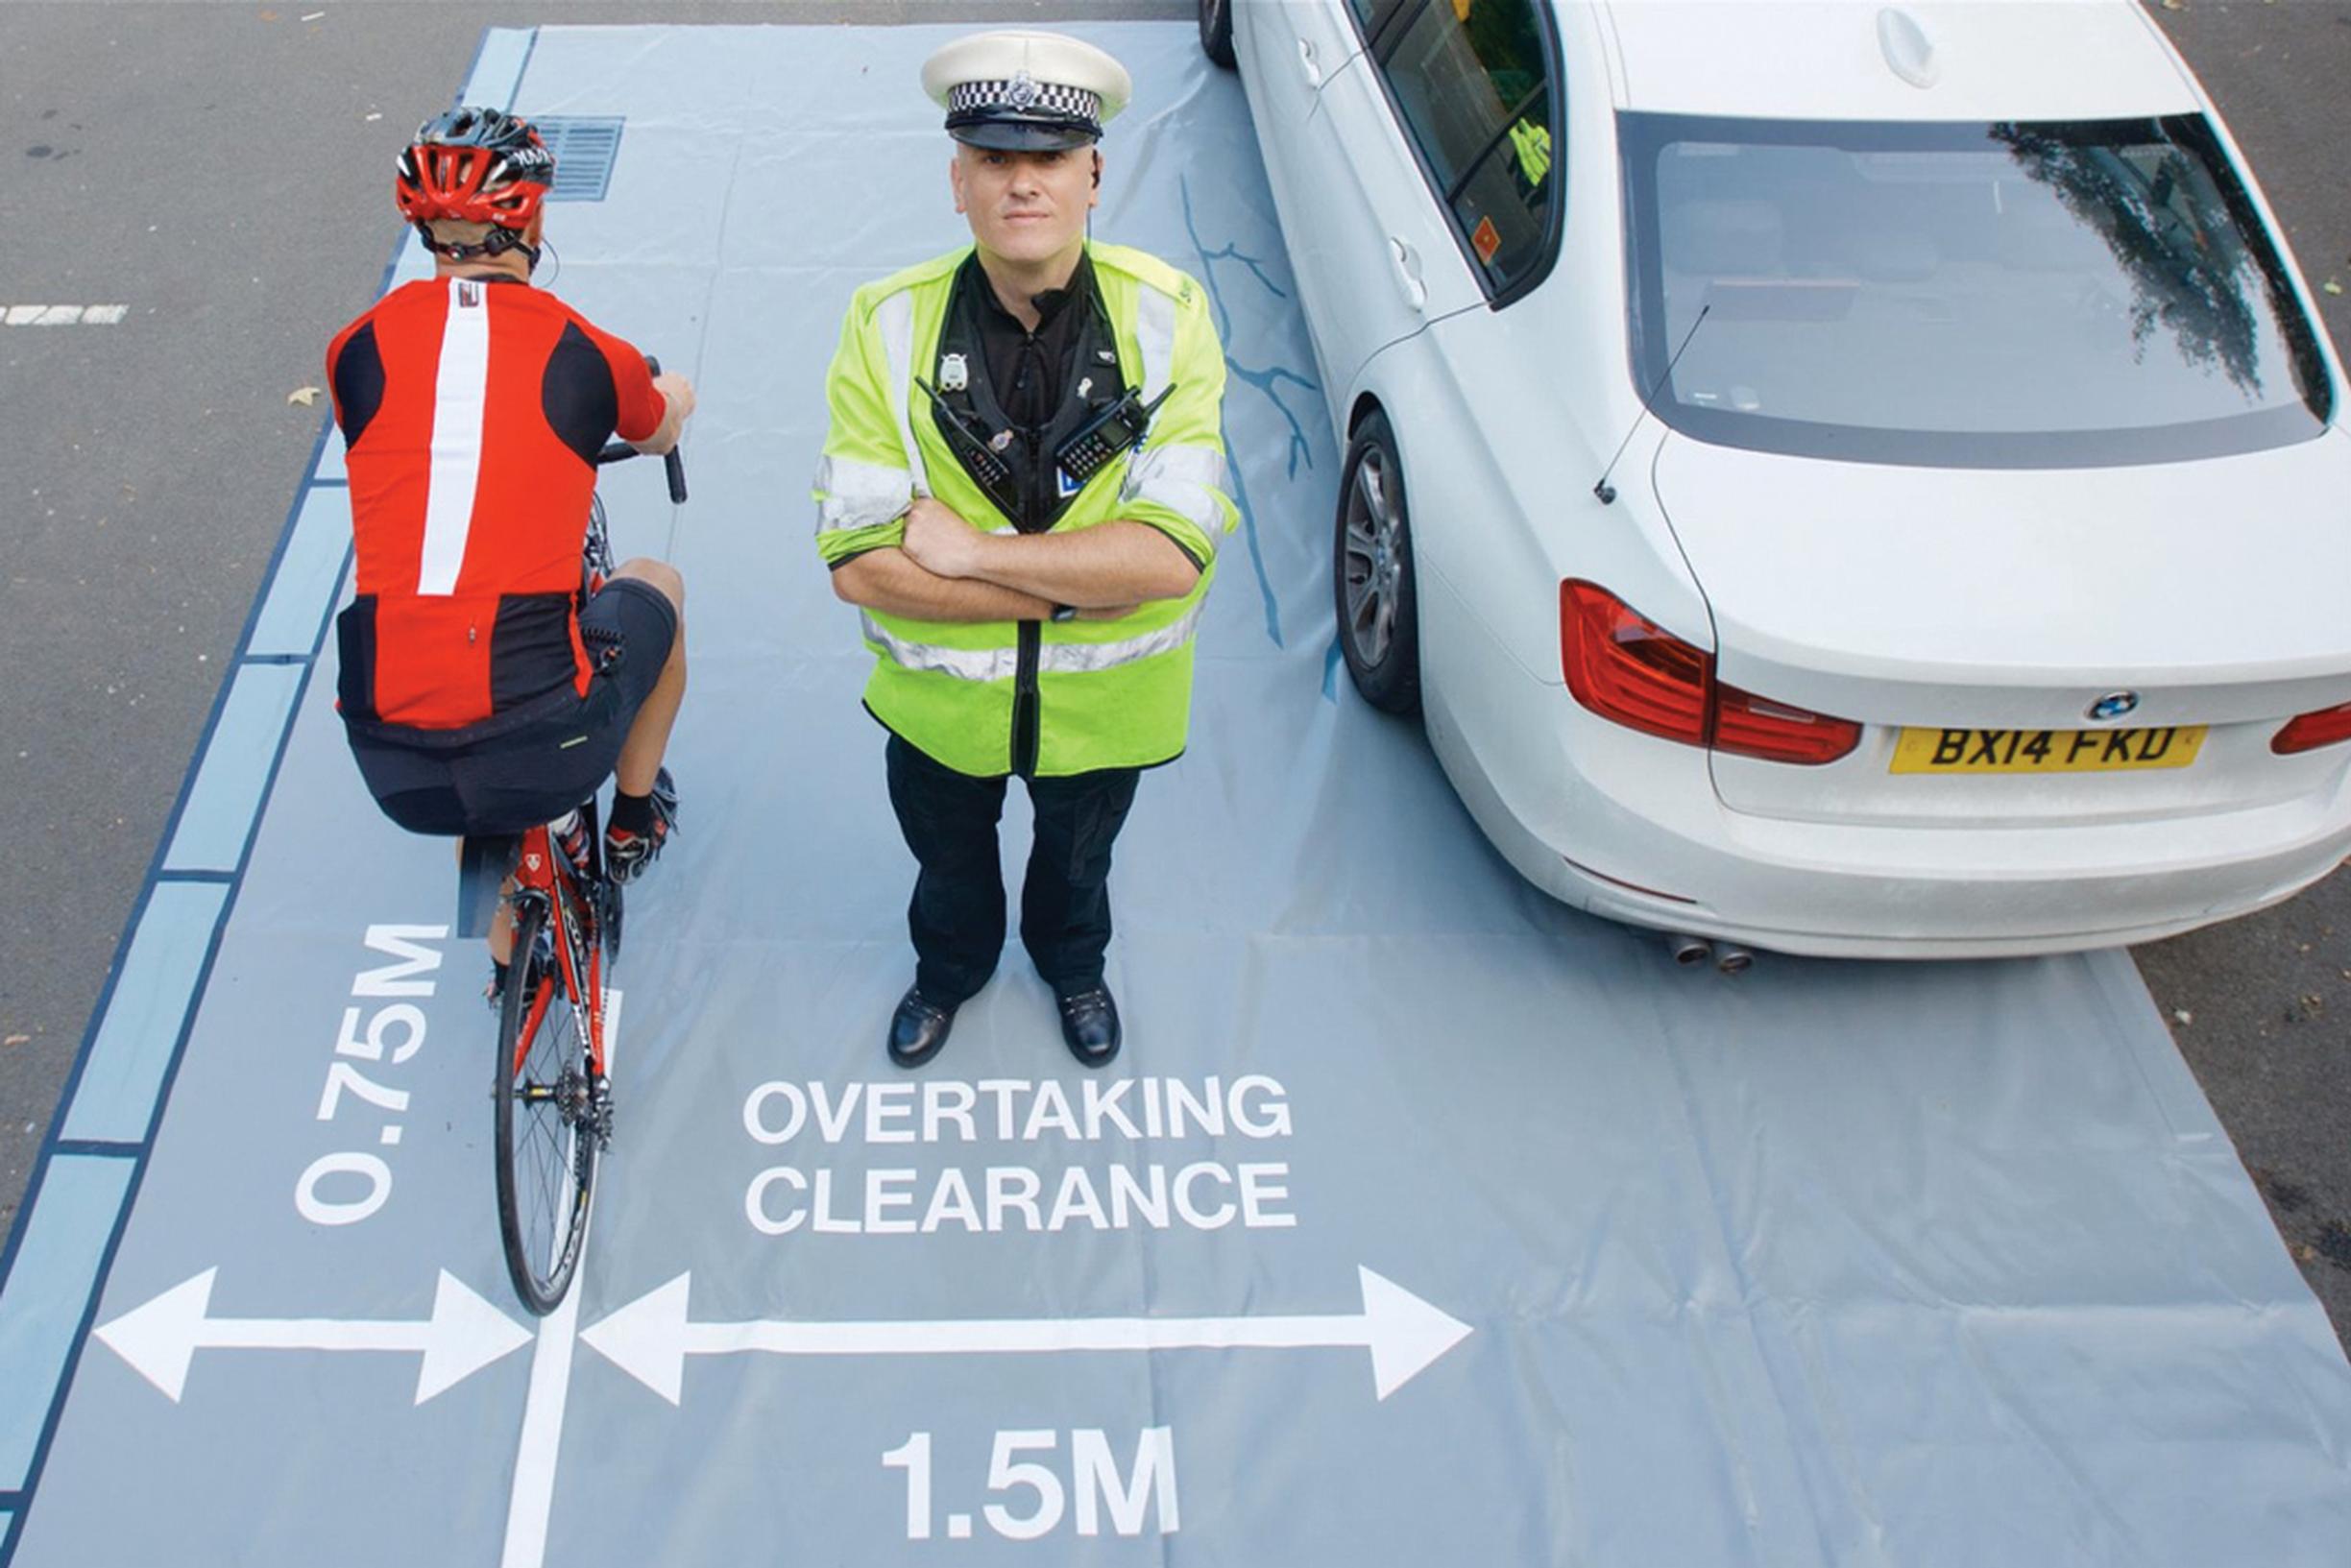 The police use mats to illustrate safe passing distances to drivers